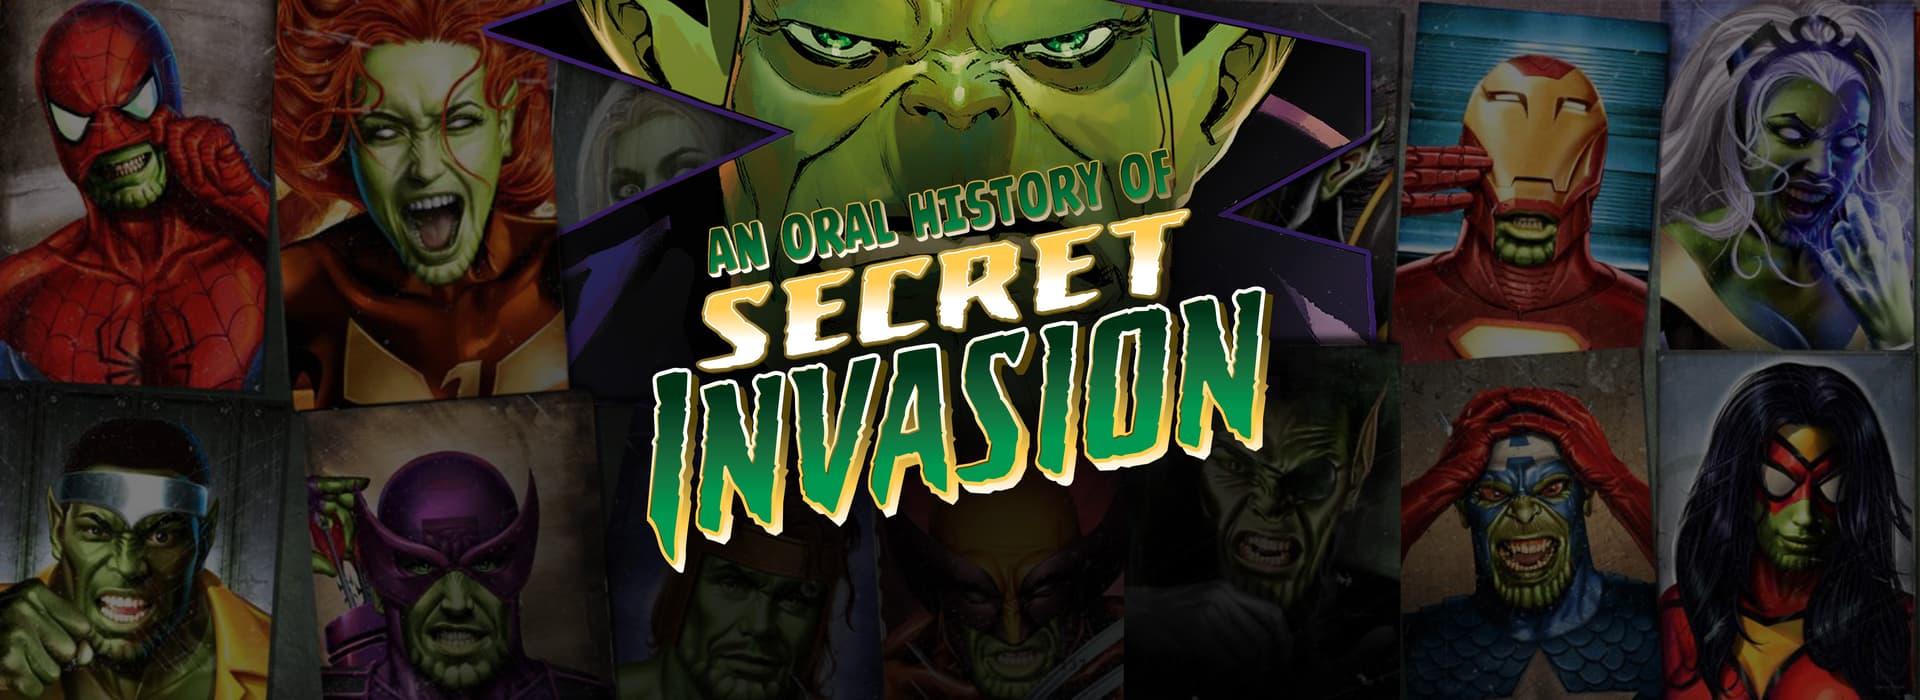 An Oral History of Secret Invasion